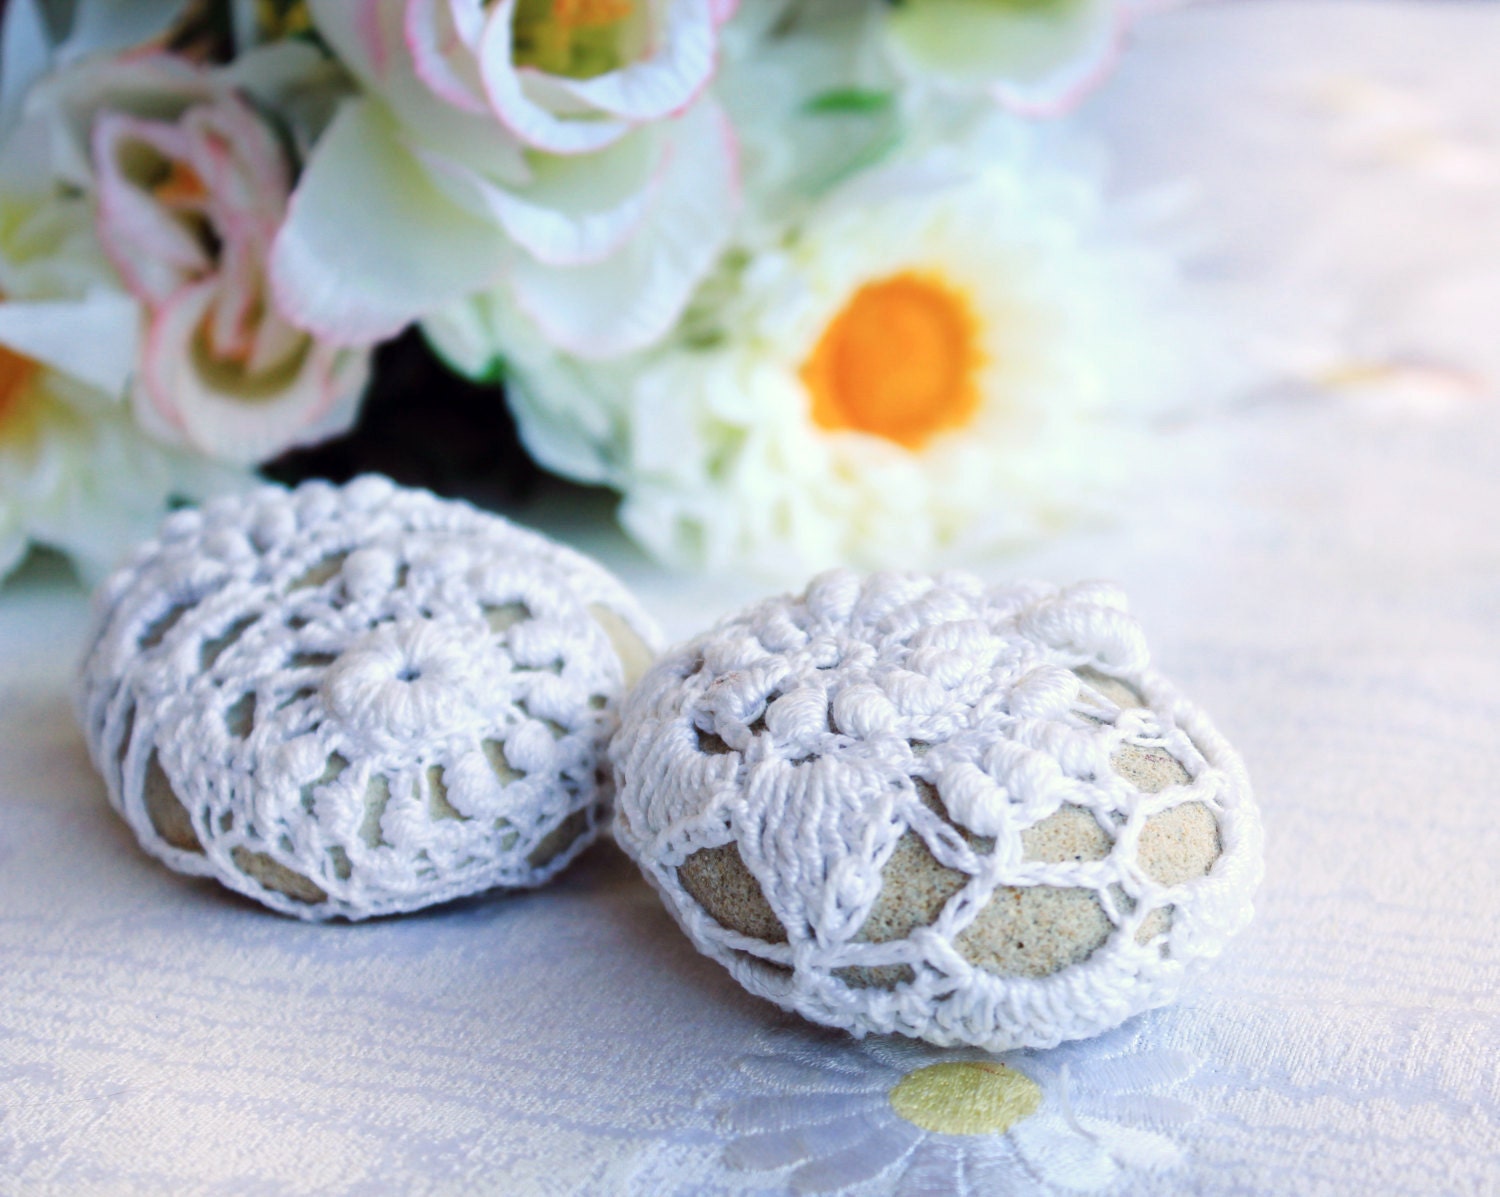 Two Crochet Free Form Lace Sea Stones OOAK Wedding Dcoration, Party Decoration, Home Decor, Table Decor, Rustic Wedding - MKrisArt